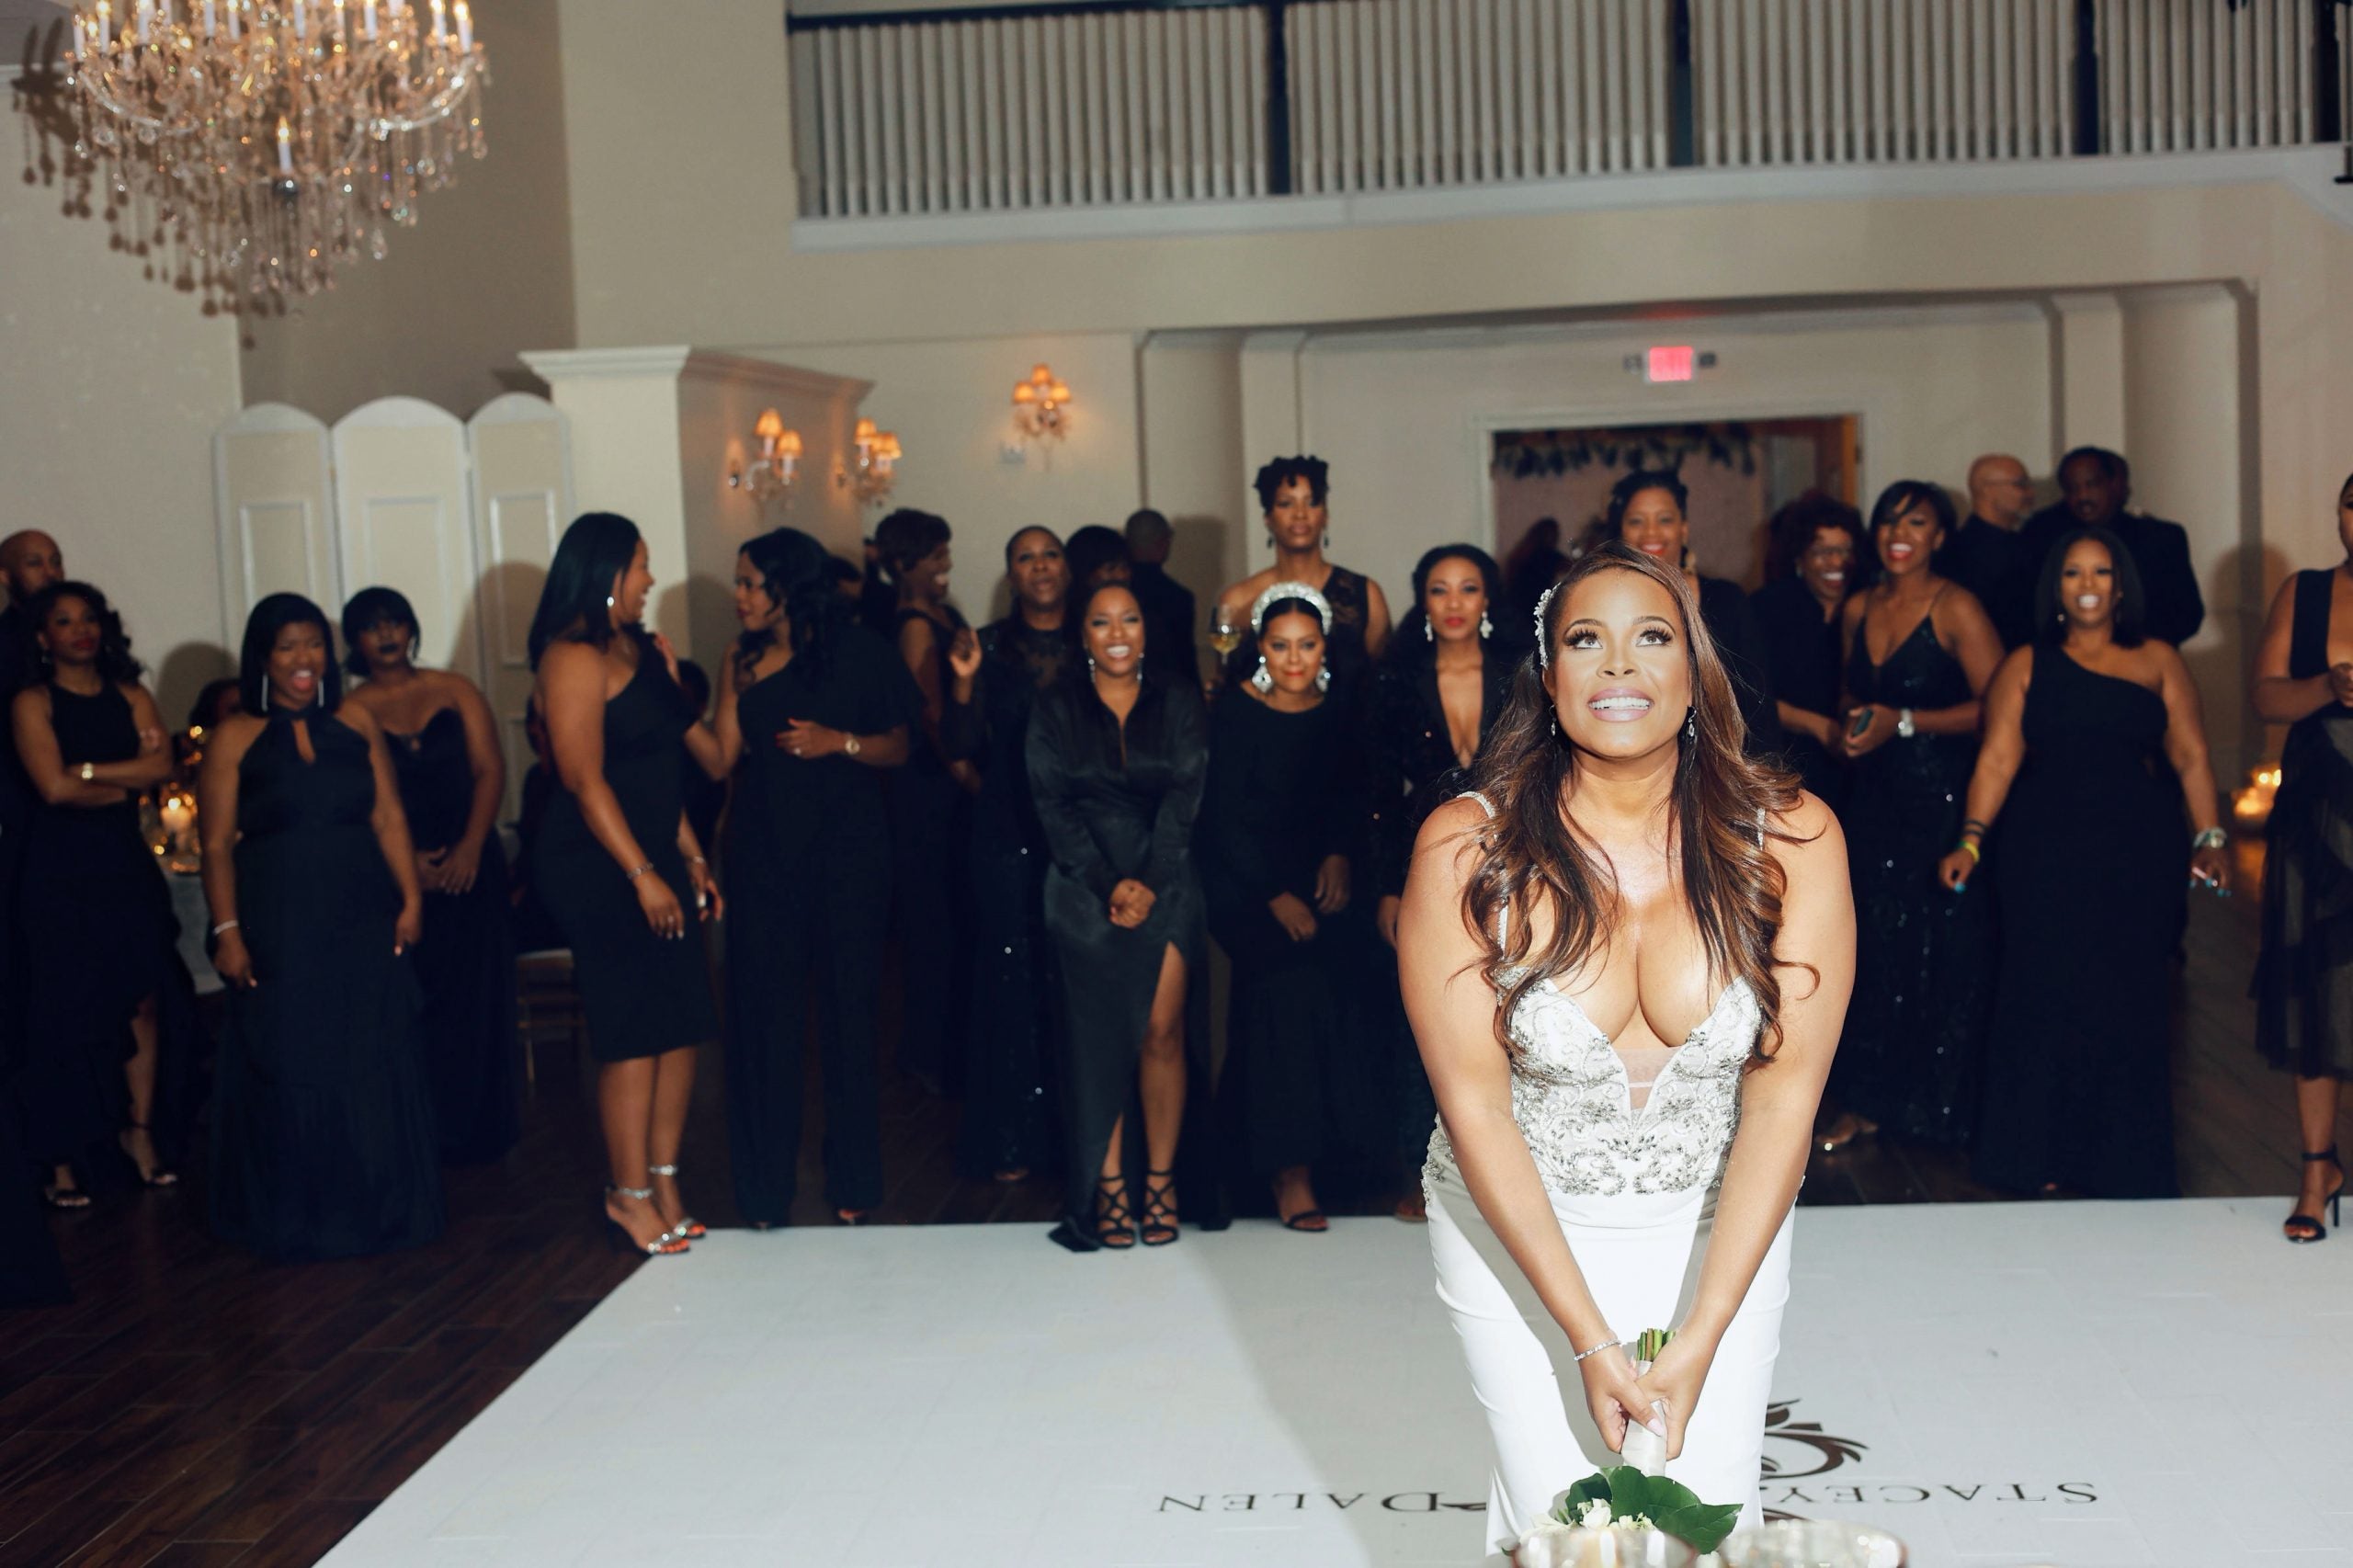 Bridal Bliss: Dalen And Stacey's Intimate Atlanta Wedding Was Full Of Some Tears And Plenty Of Joy